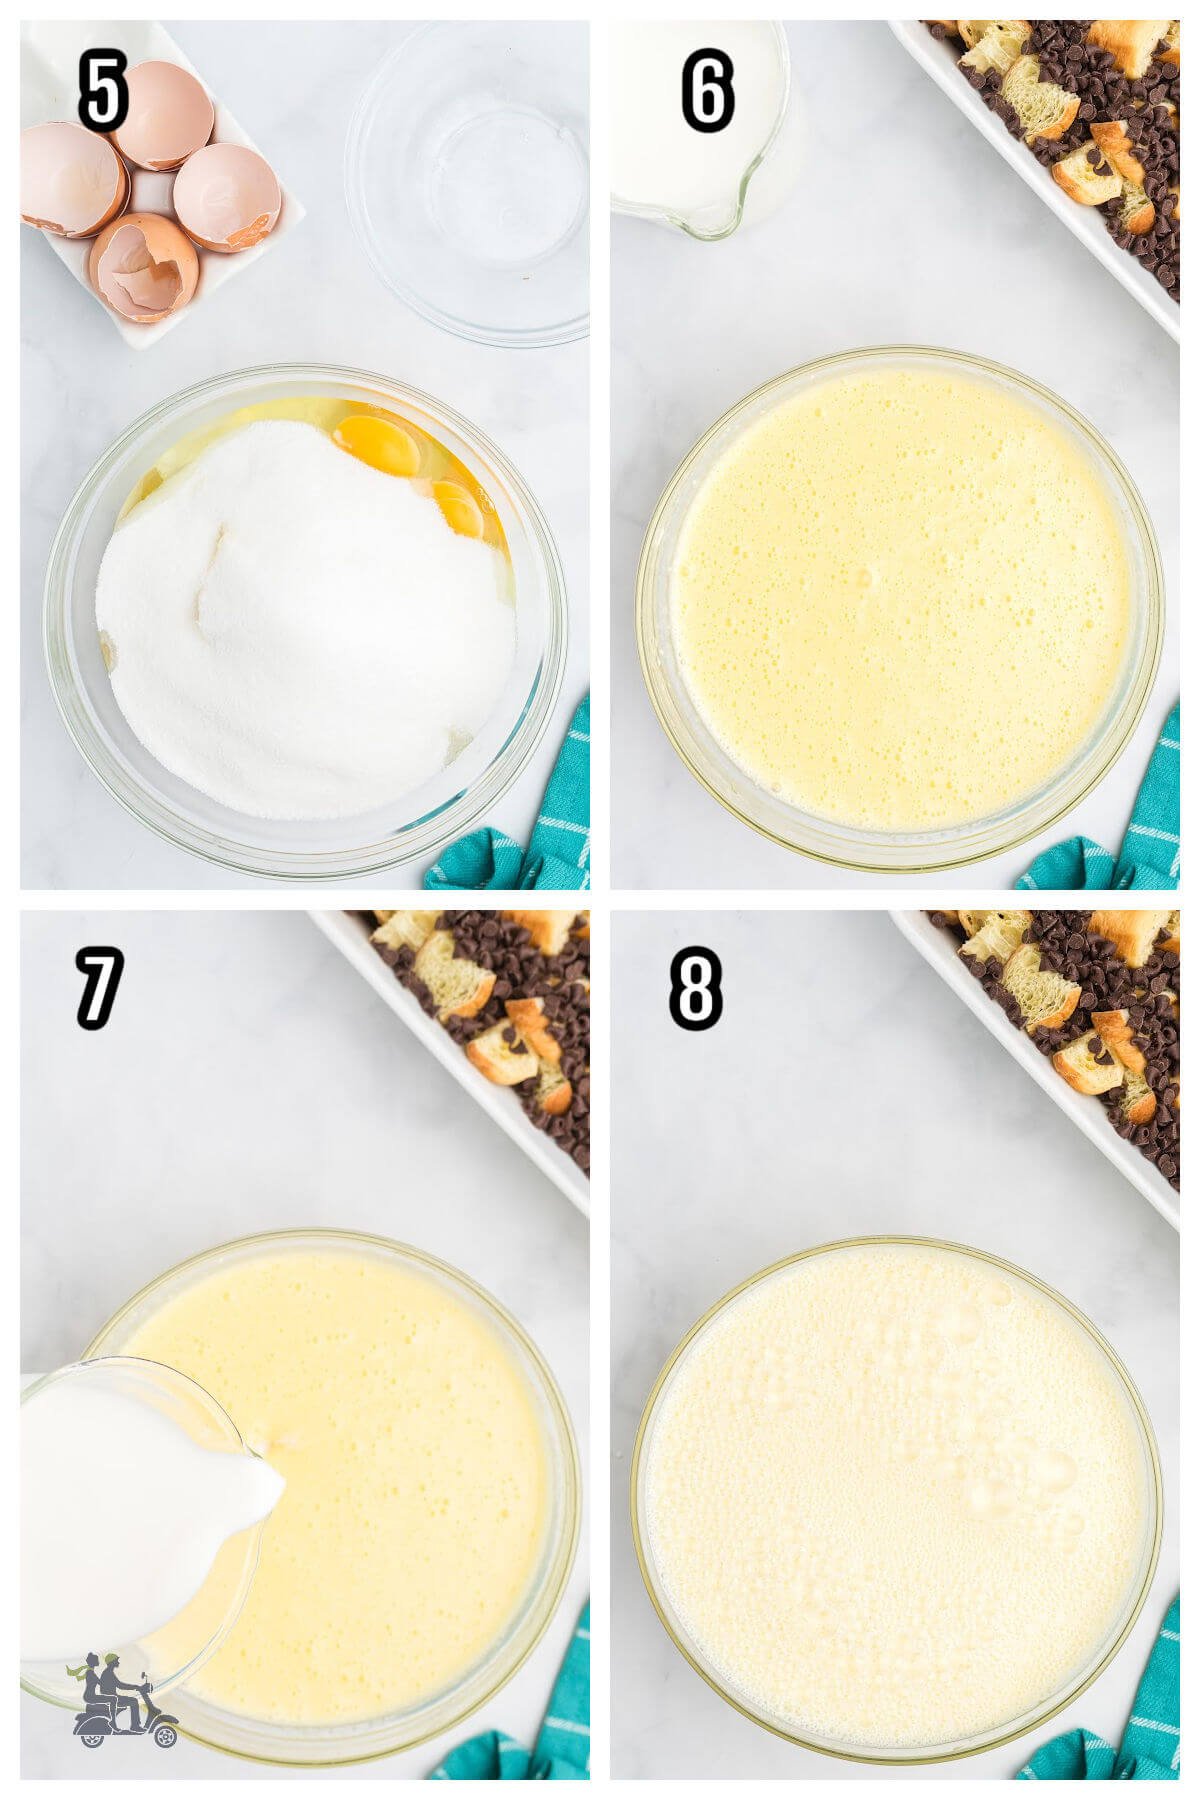 The second set of steps to making the Chocolate Croissant breakfast bake.